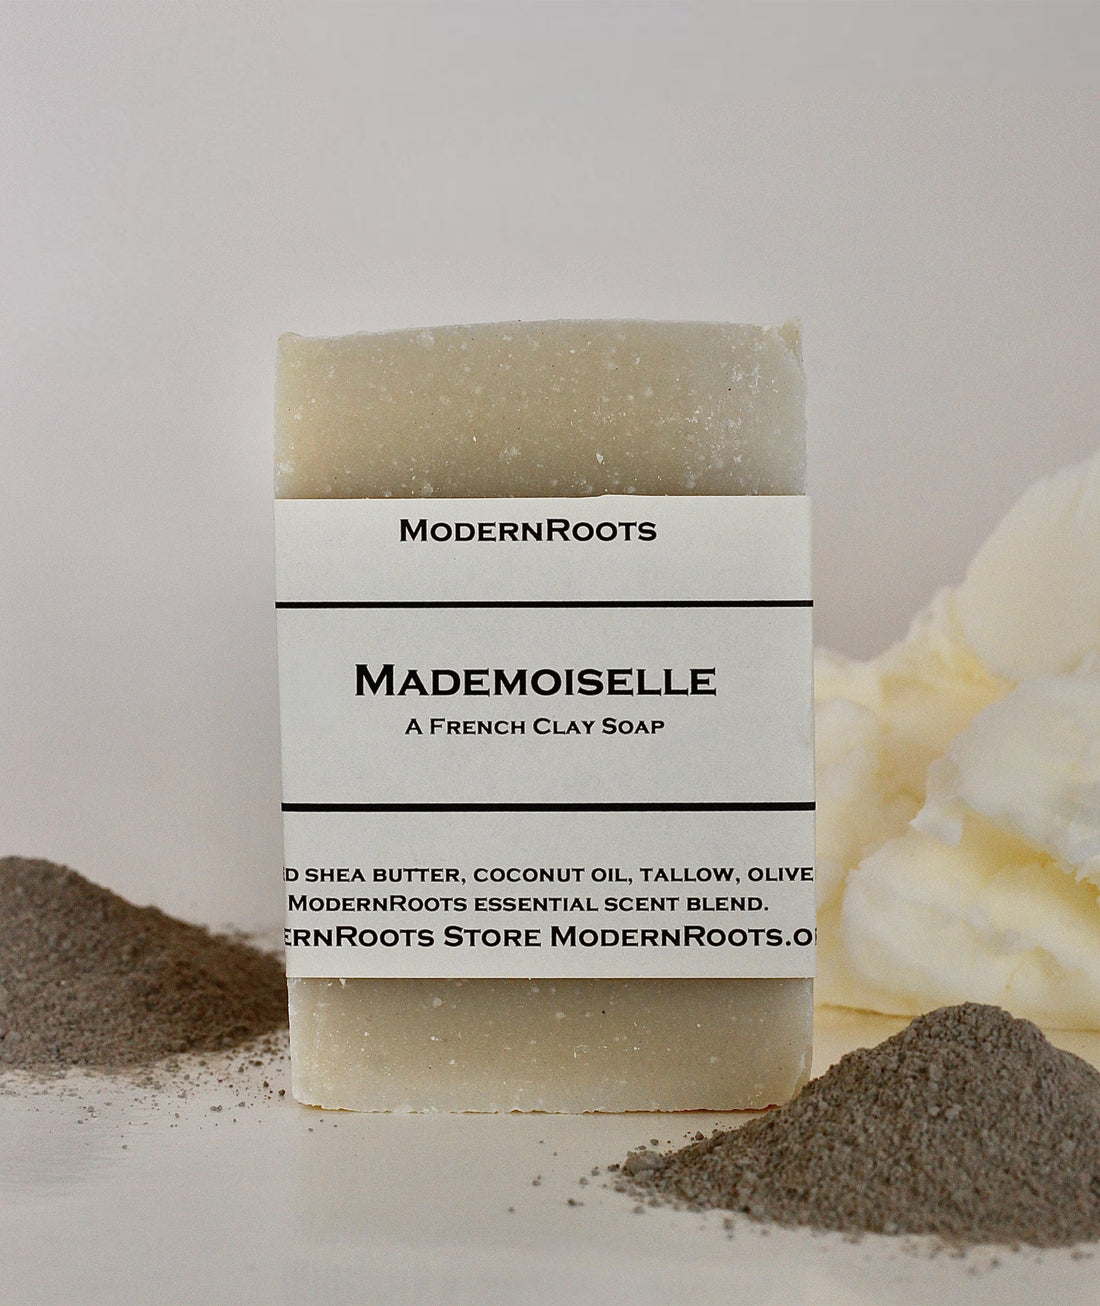 Mademoiselle - A French Clay Soap